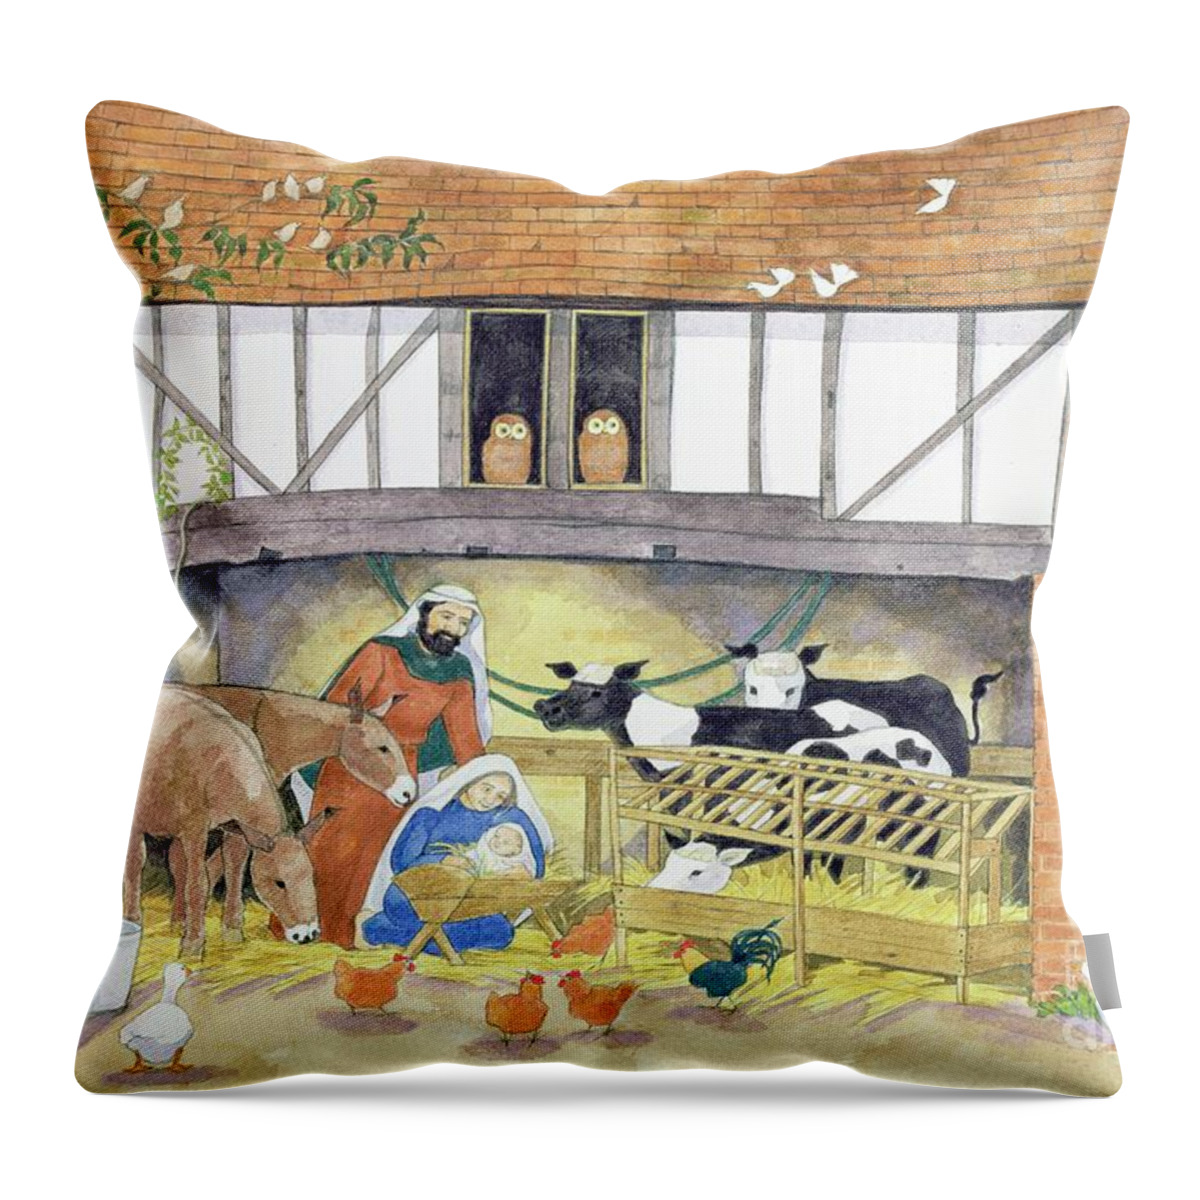 Birth Of Christ Throw Pillow featuring the painting Nativity by Linda Benton